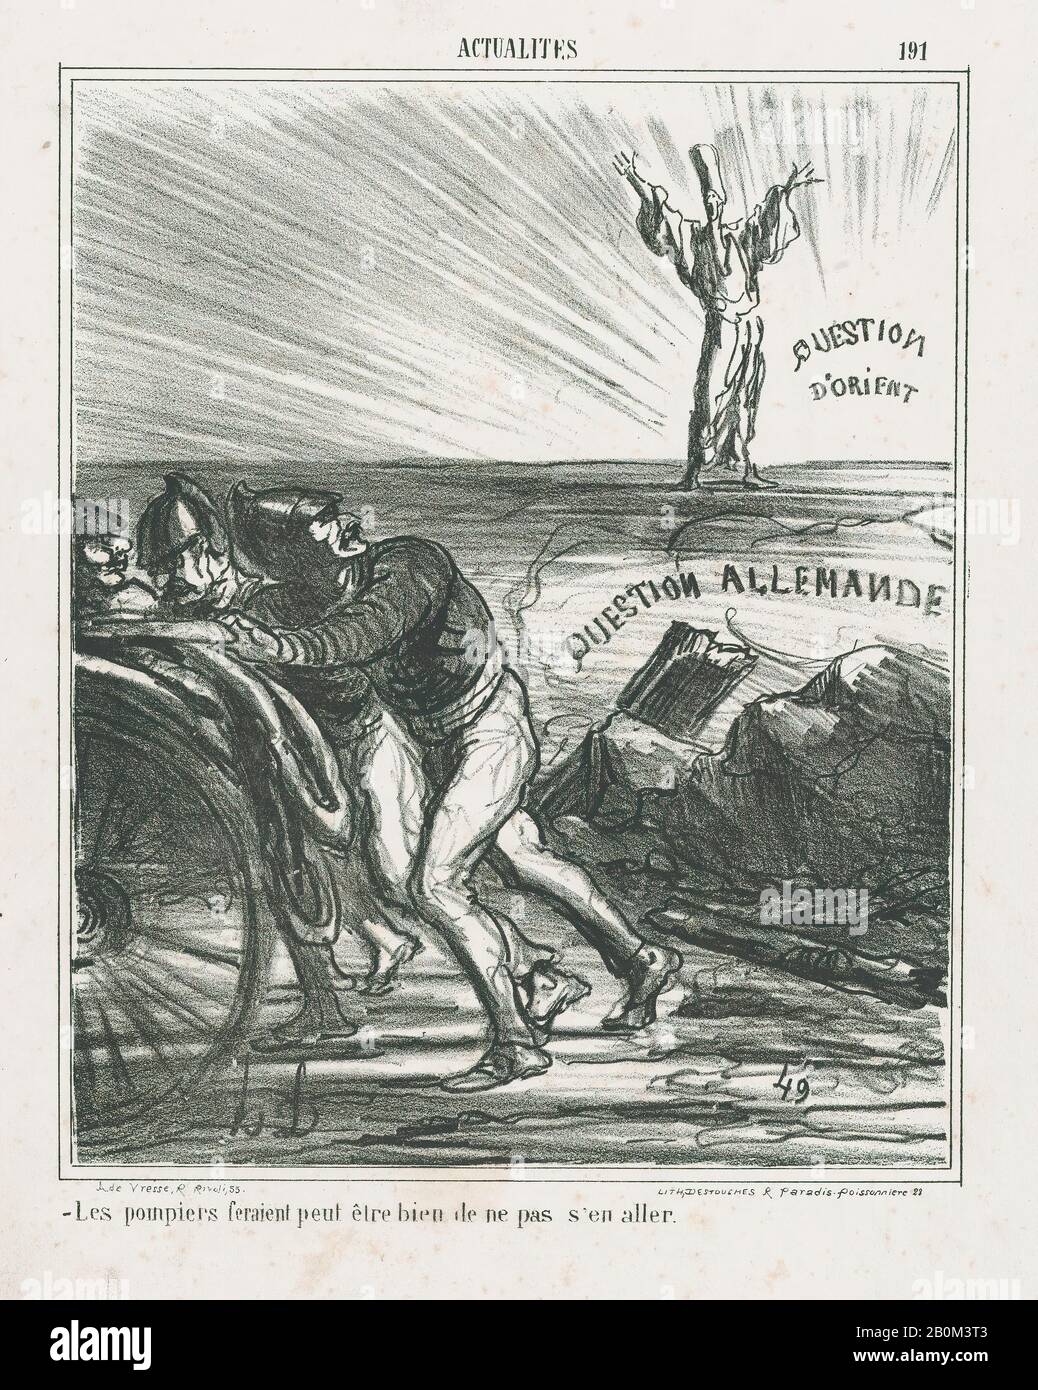 Honoré Daumier, Maybe the firemen really shouldn't leave just yet, from 'News of the day,' published in Le Charivari, October 4, 1866, 'News of the day' (Actualités), Honoré Daumier (French, Marseilles 1808–1879 Valmondois), October 4, 1866, Lithograph on wove paper; third state of three (Delteil), Image: 10 3/16 × 8 1/4 in. (25.9 × 21 cm), Sheet: 14 1/8 × 10 3/8 in. (35.9 × 26.4 cm), Prints Stock Photo